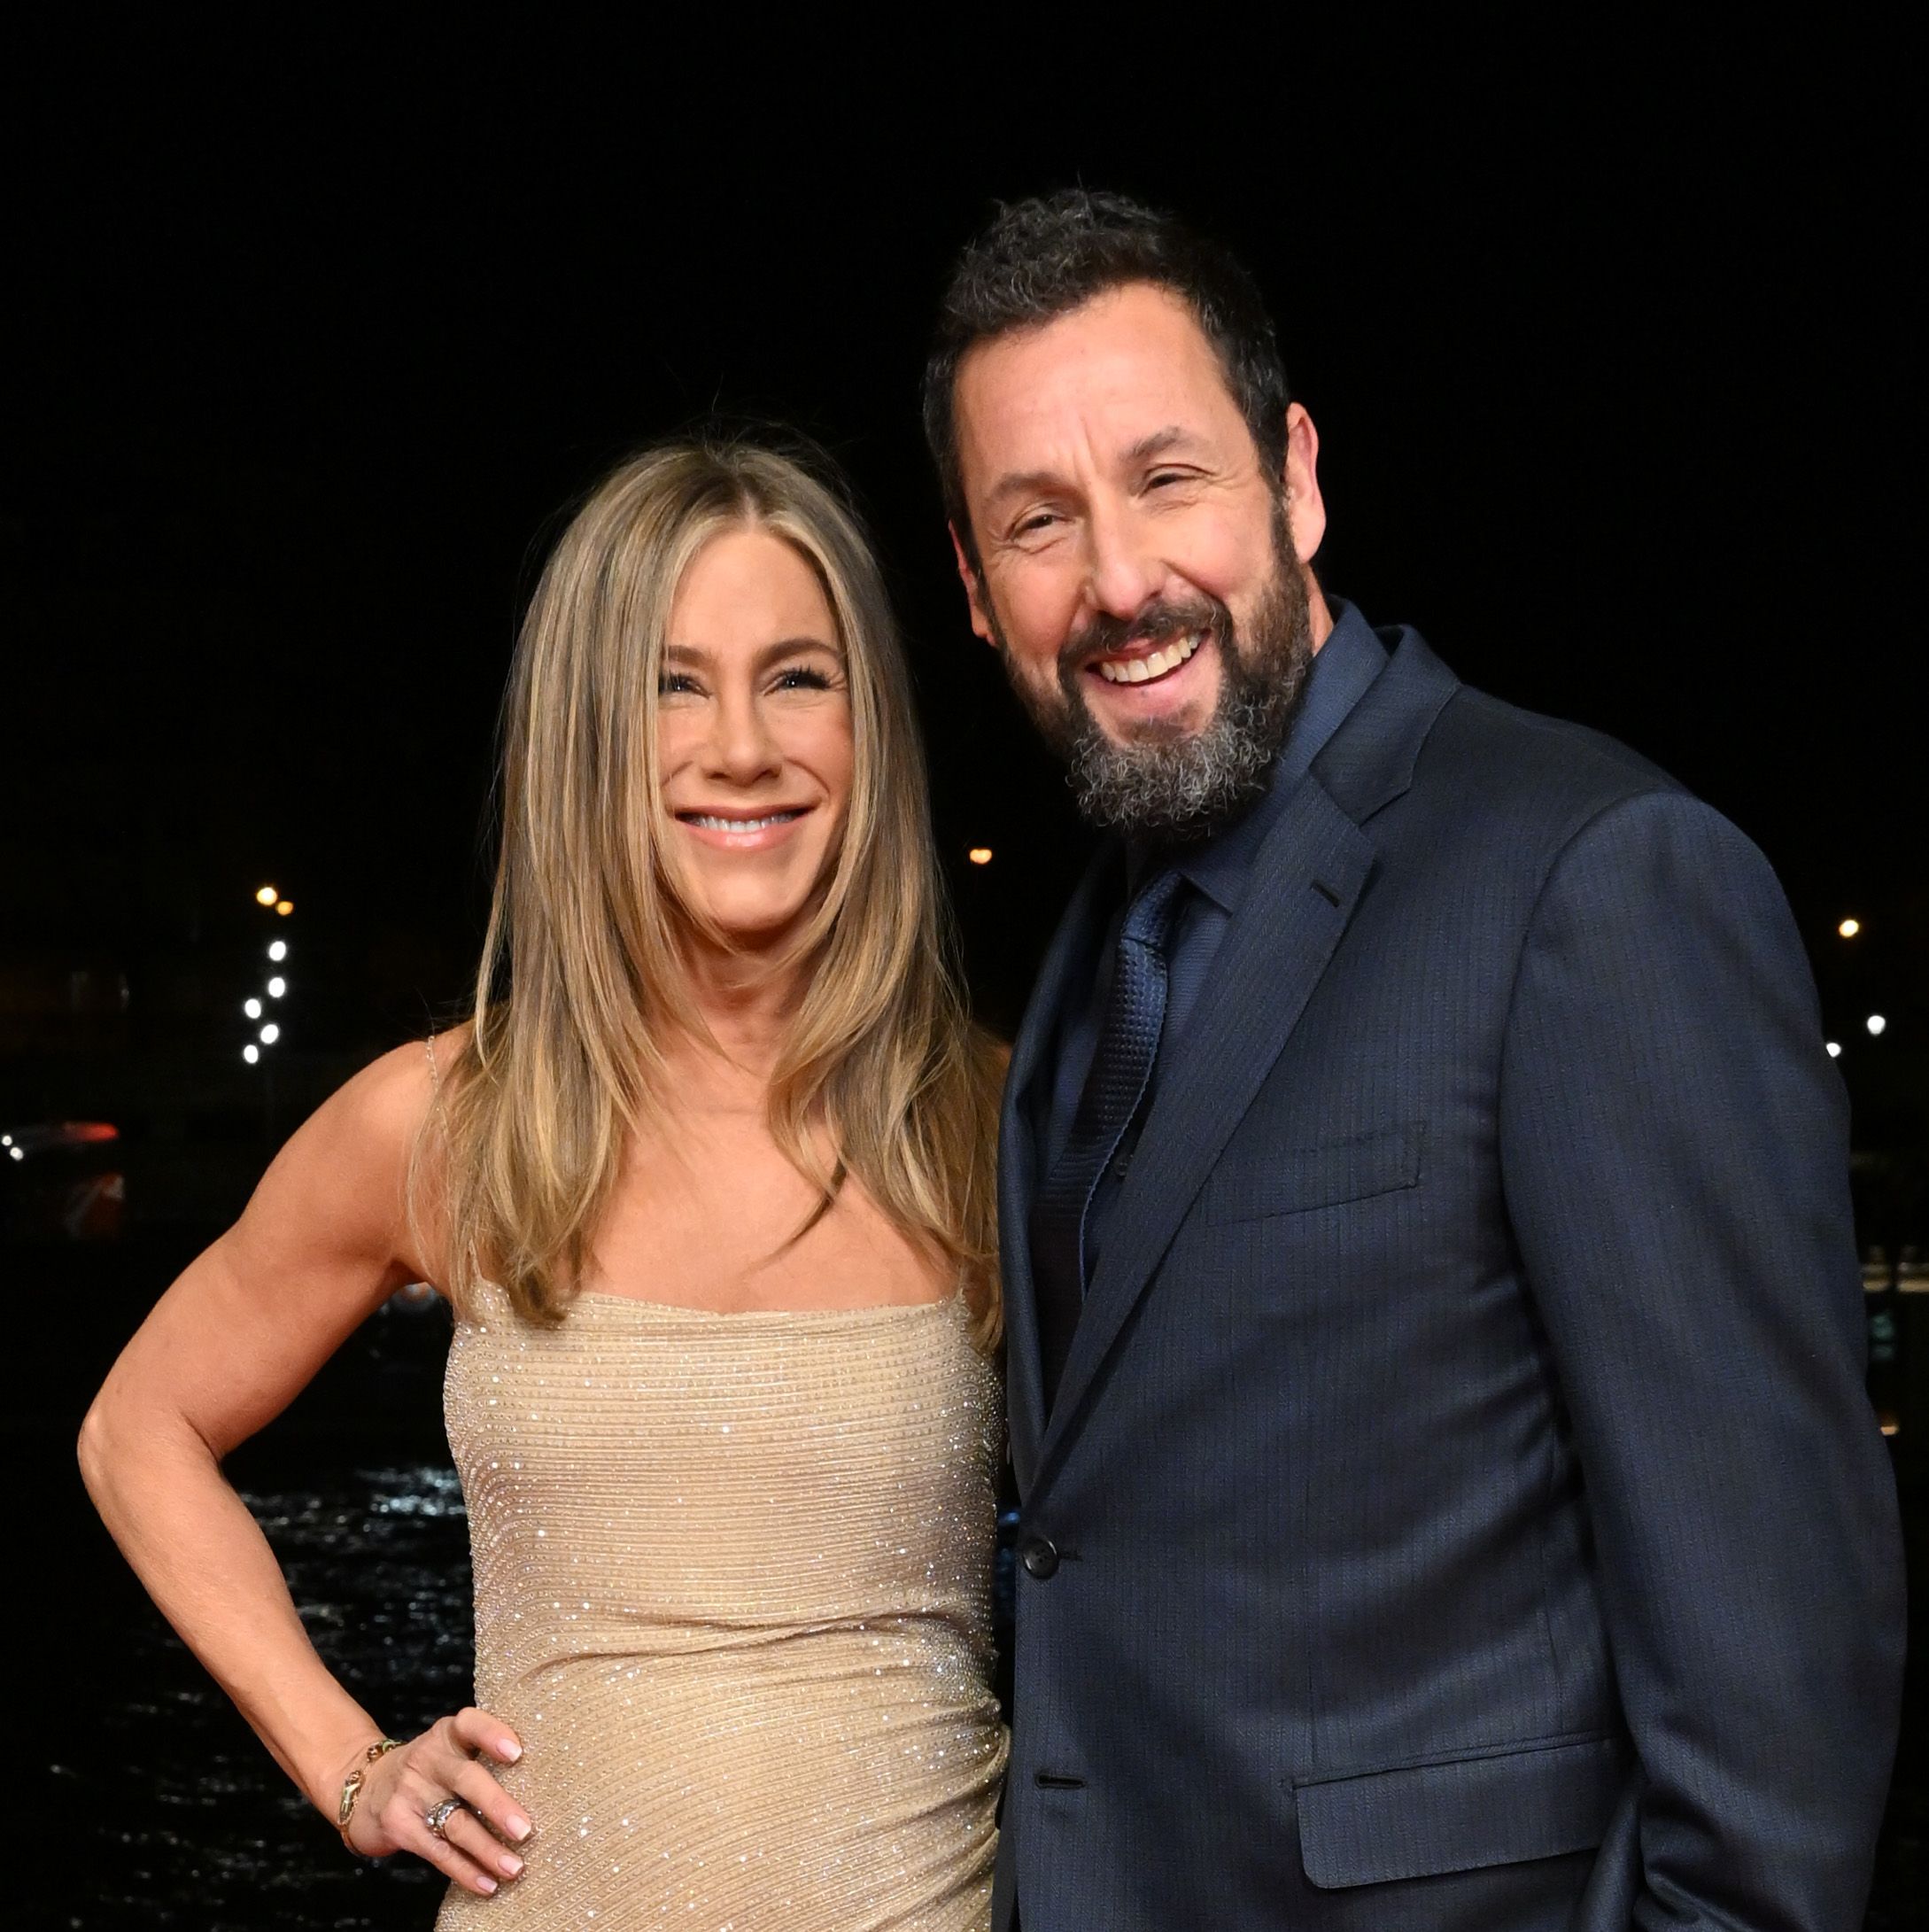 Jennifer Aniston, in a Sheer Mini Dress, Called Out Adam Sandler for Wearing a Sweatshirt to Their Premiere